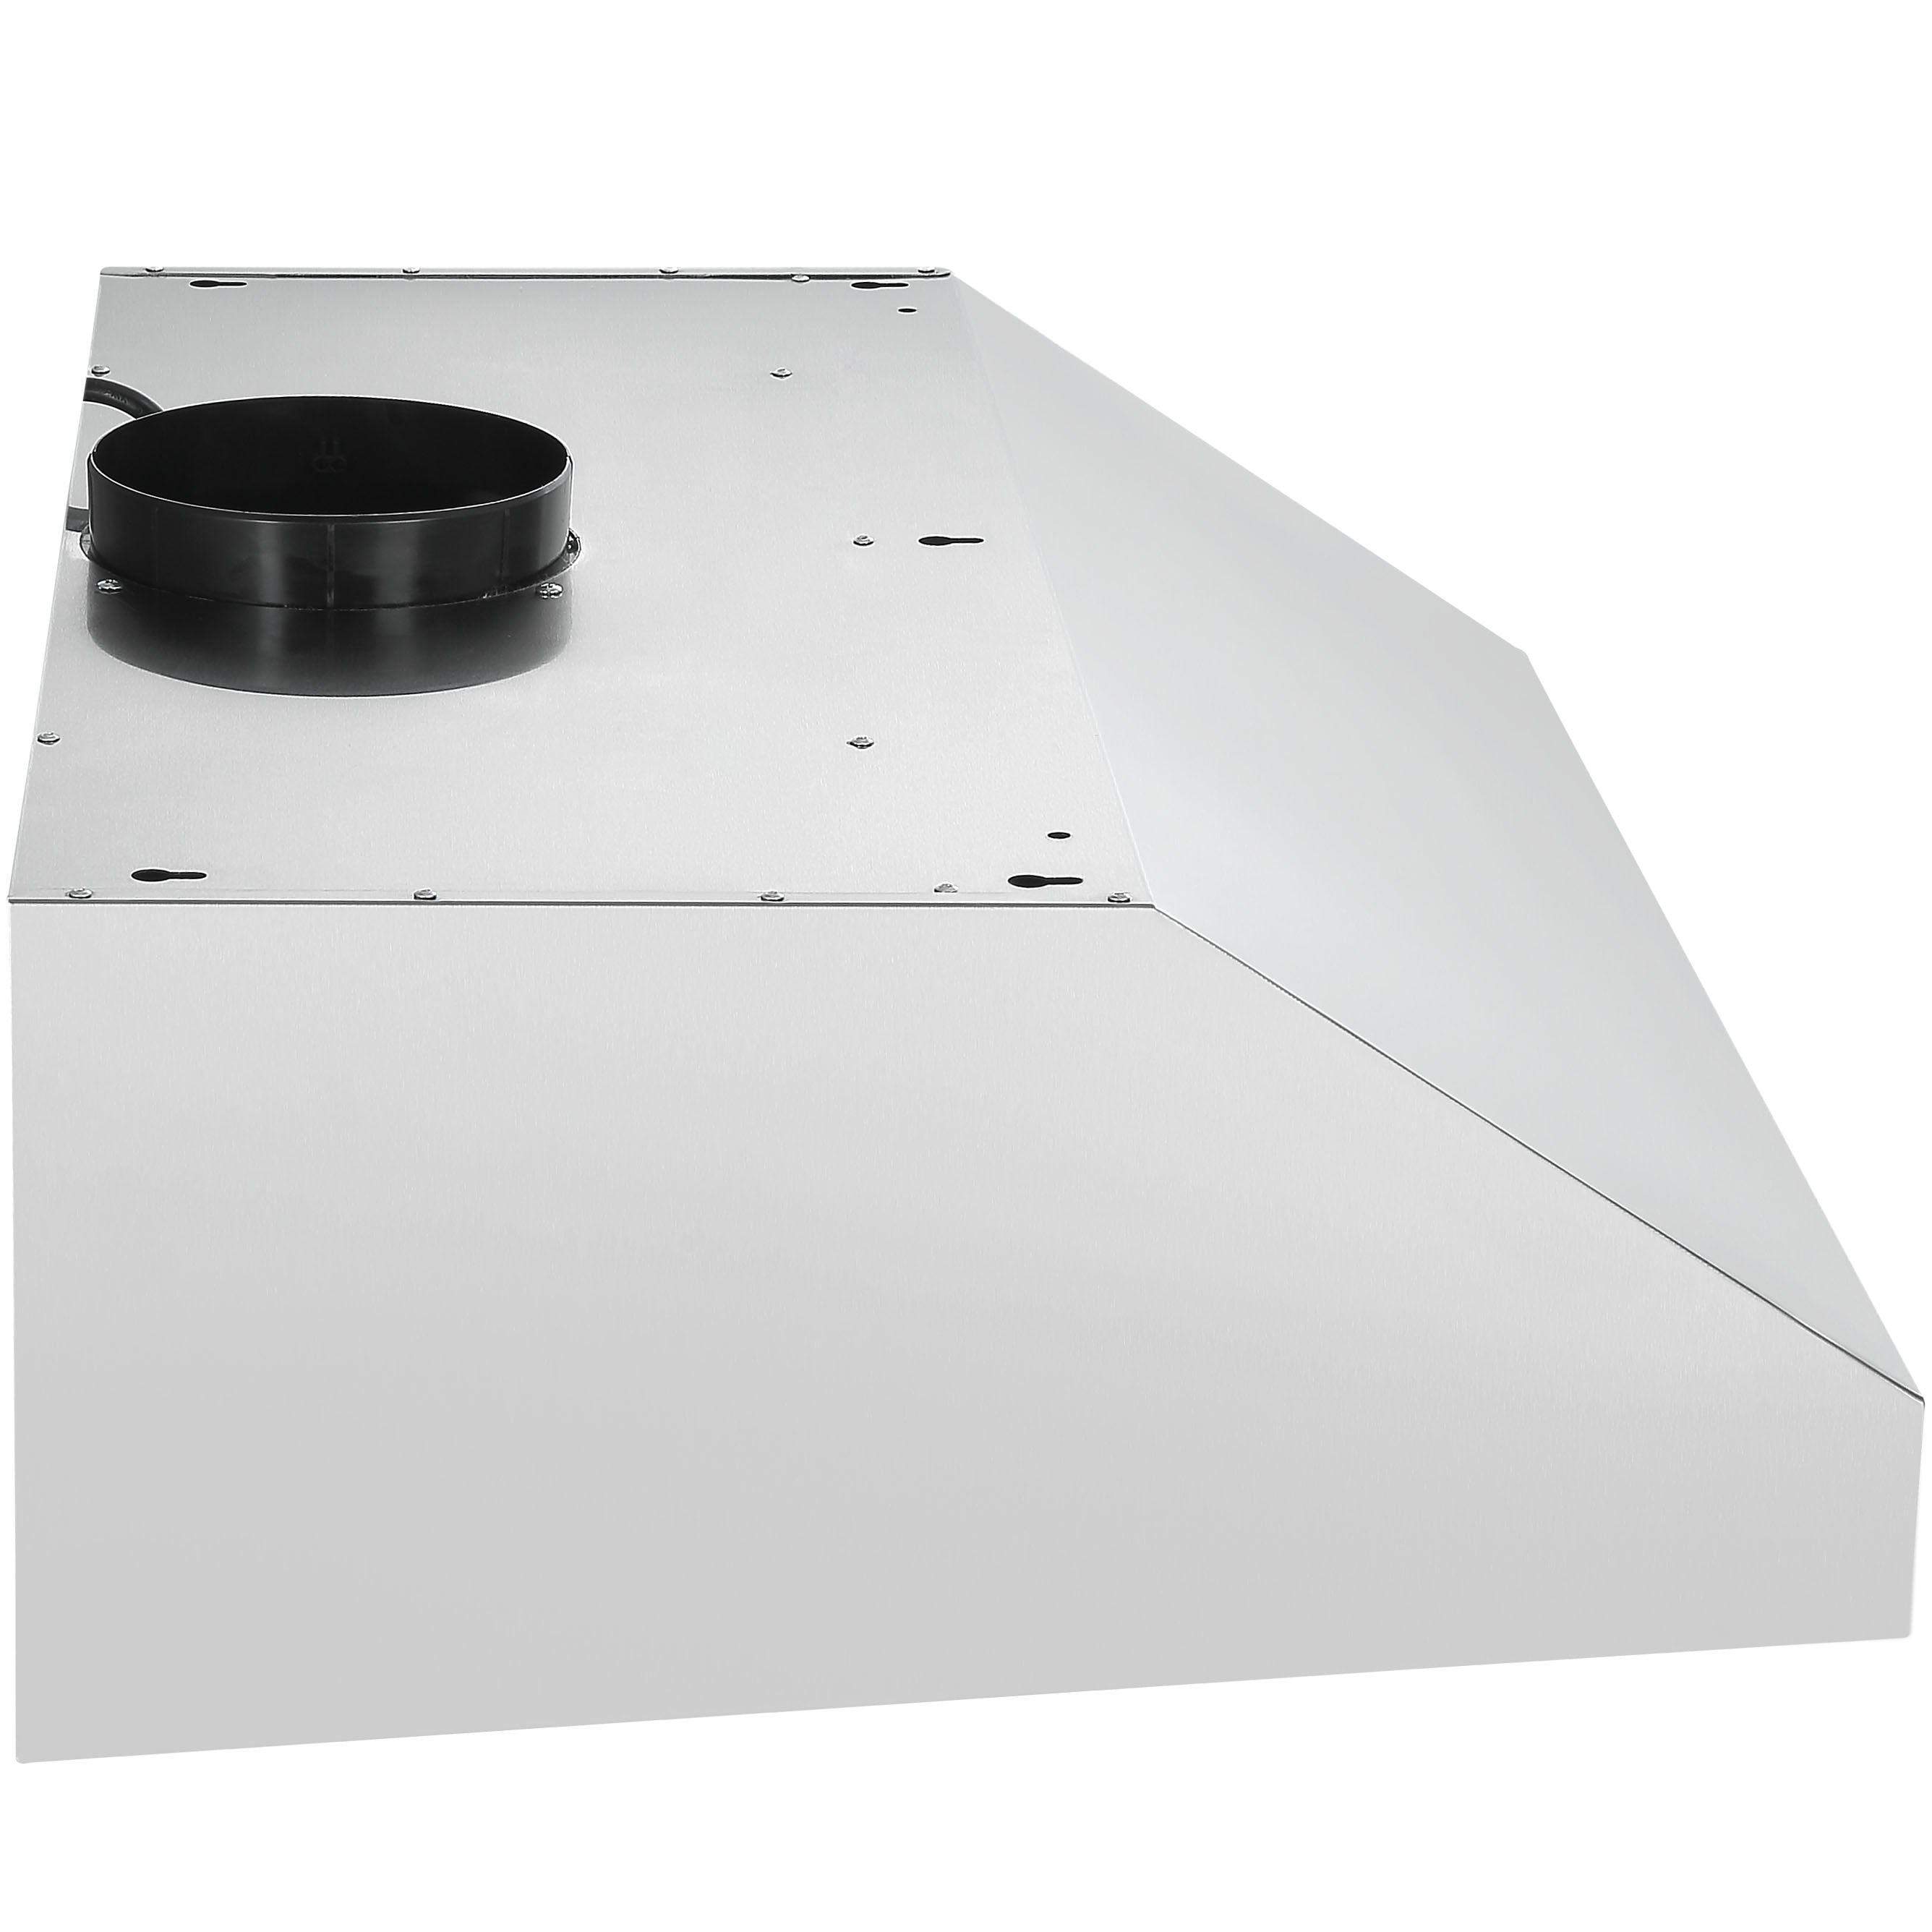 Ancona 30in. Ducted Under Cabinet Range Hood in Stainless Steel